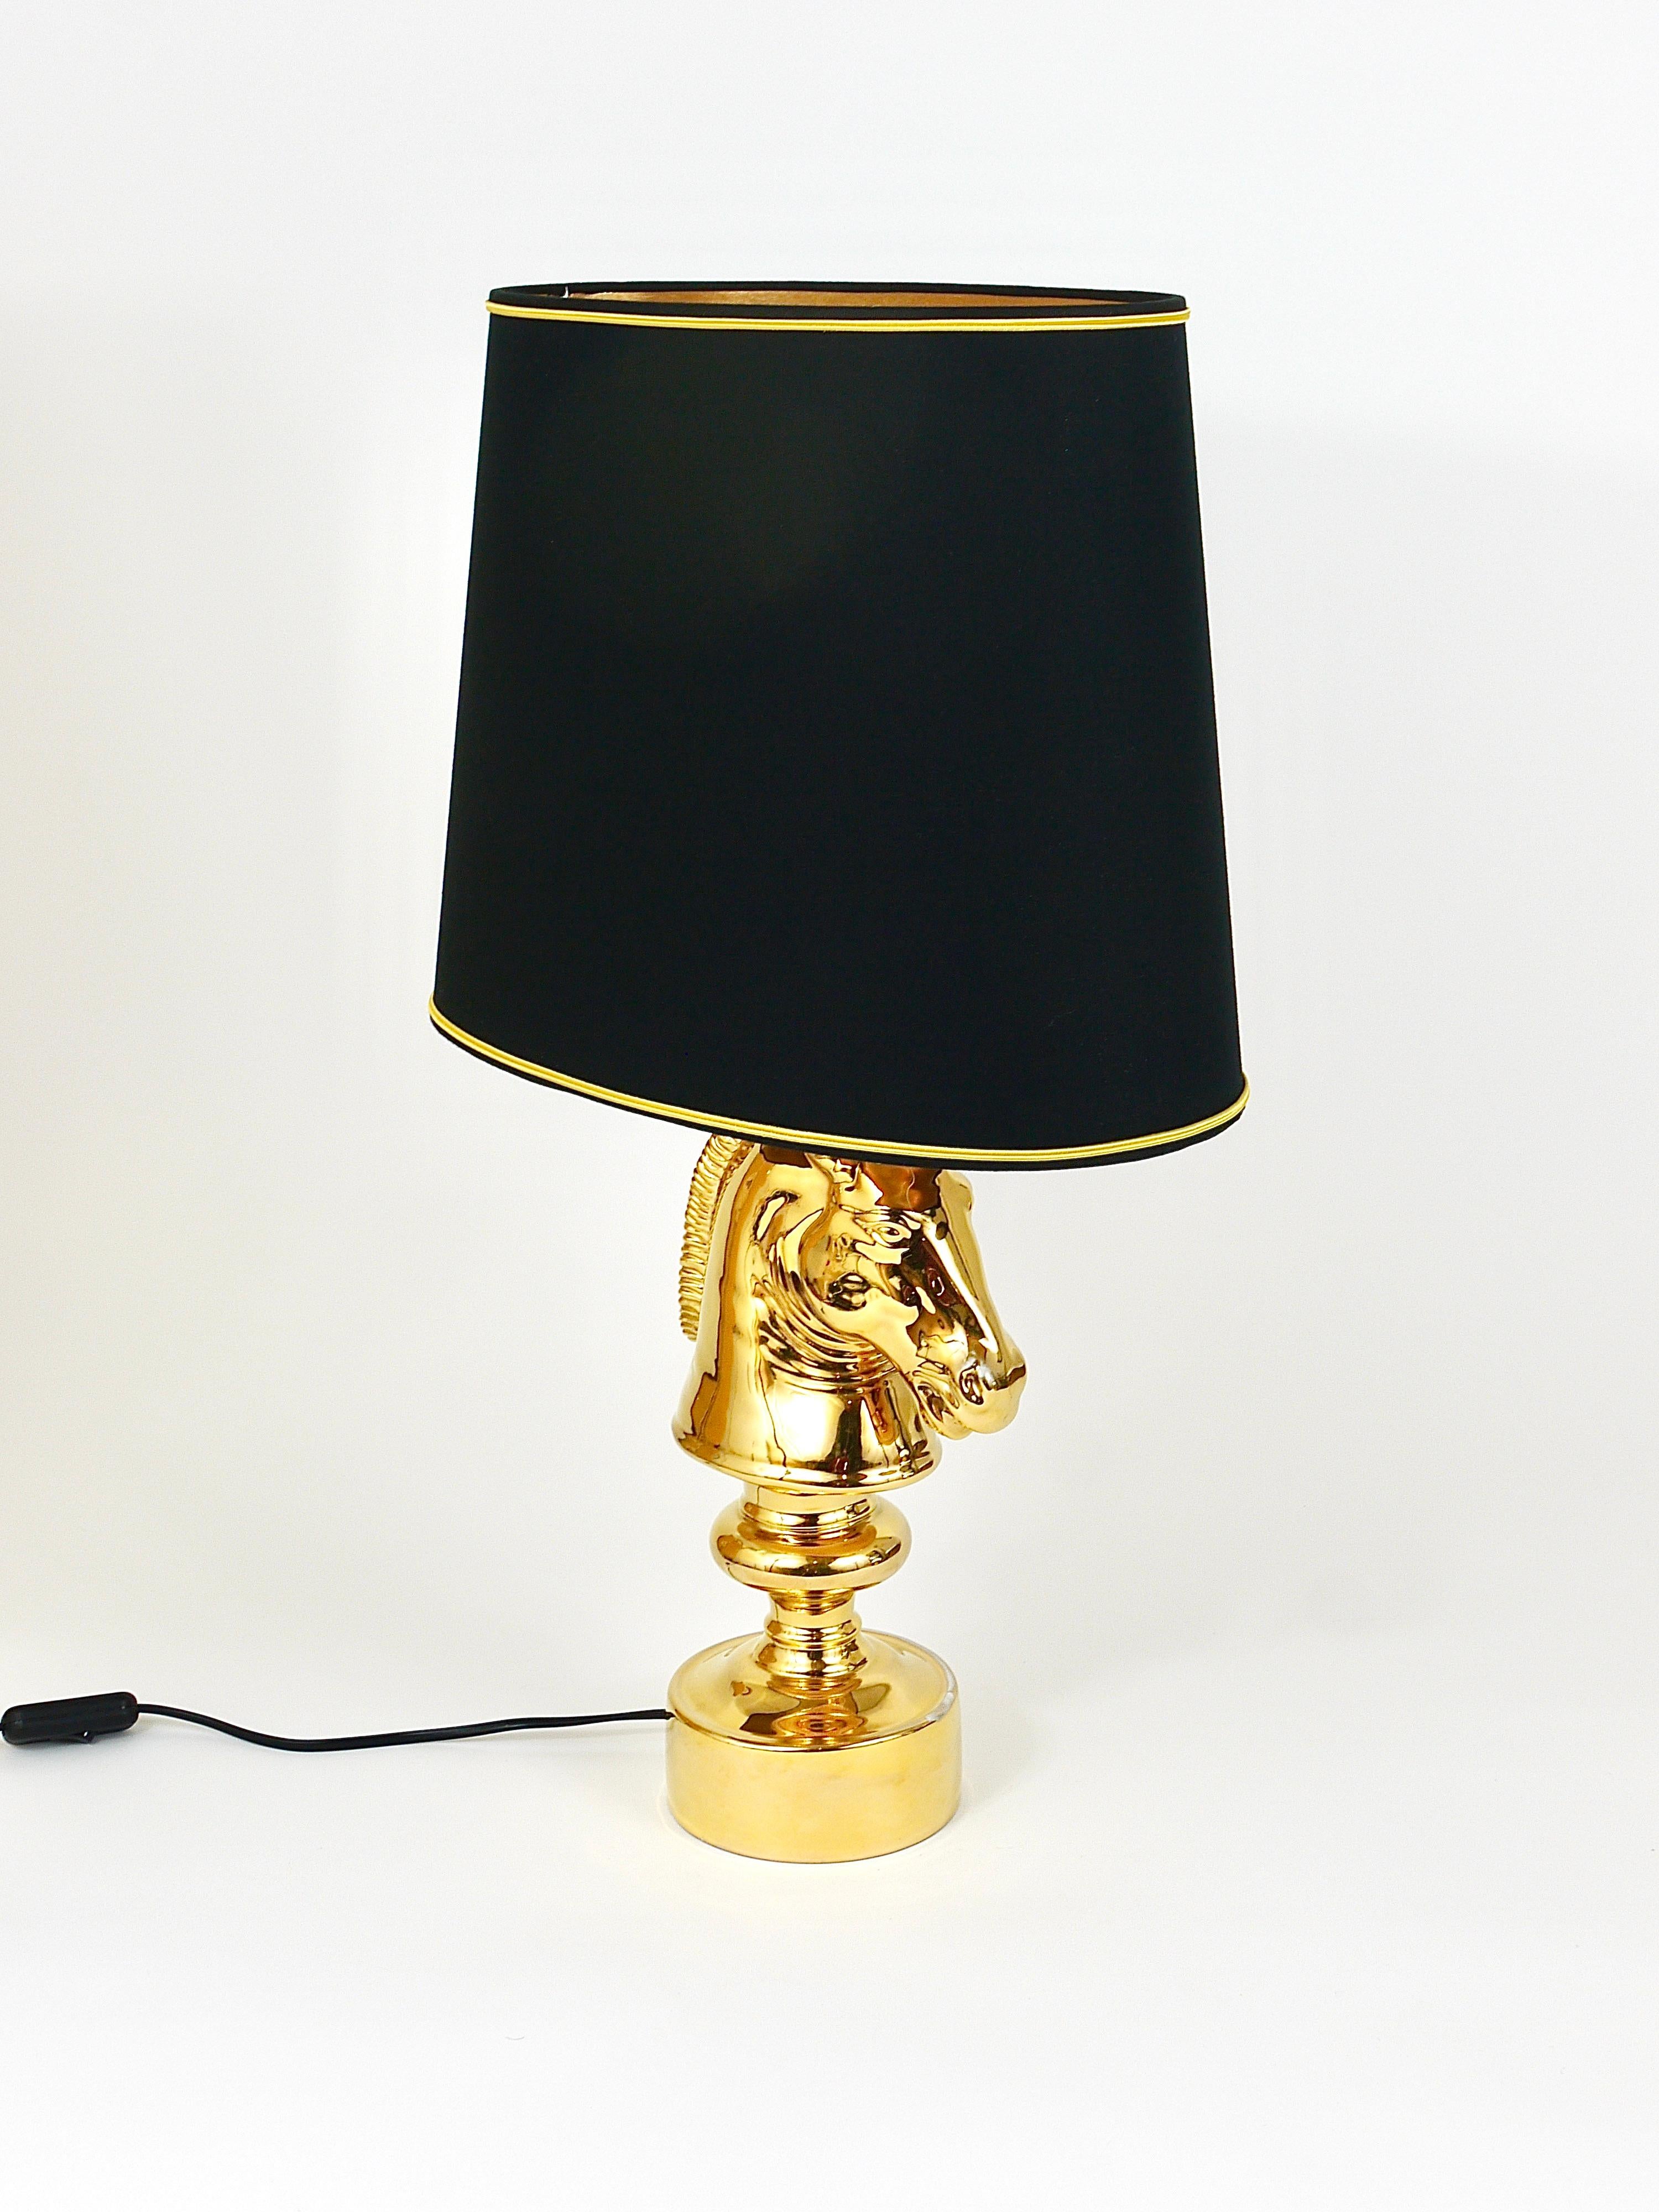 Golden Hollywood Regency Horse Sculpture Table or Side Lamp, Italy, 1970s For Sale 4